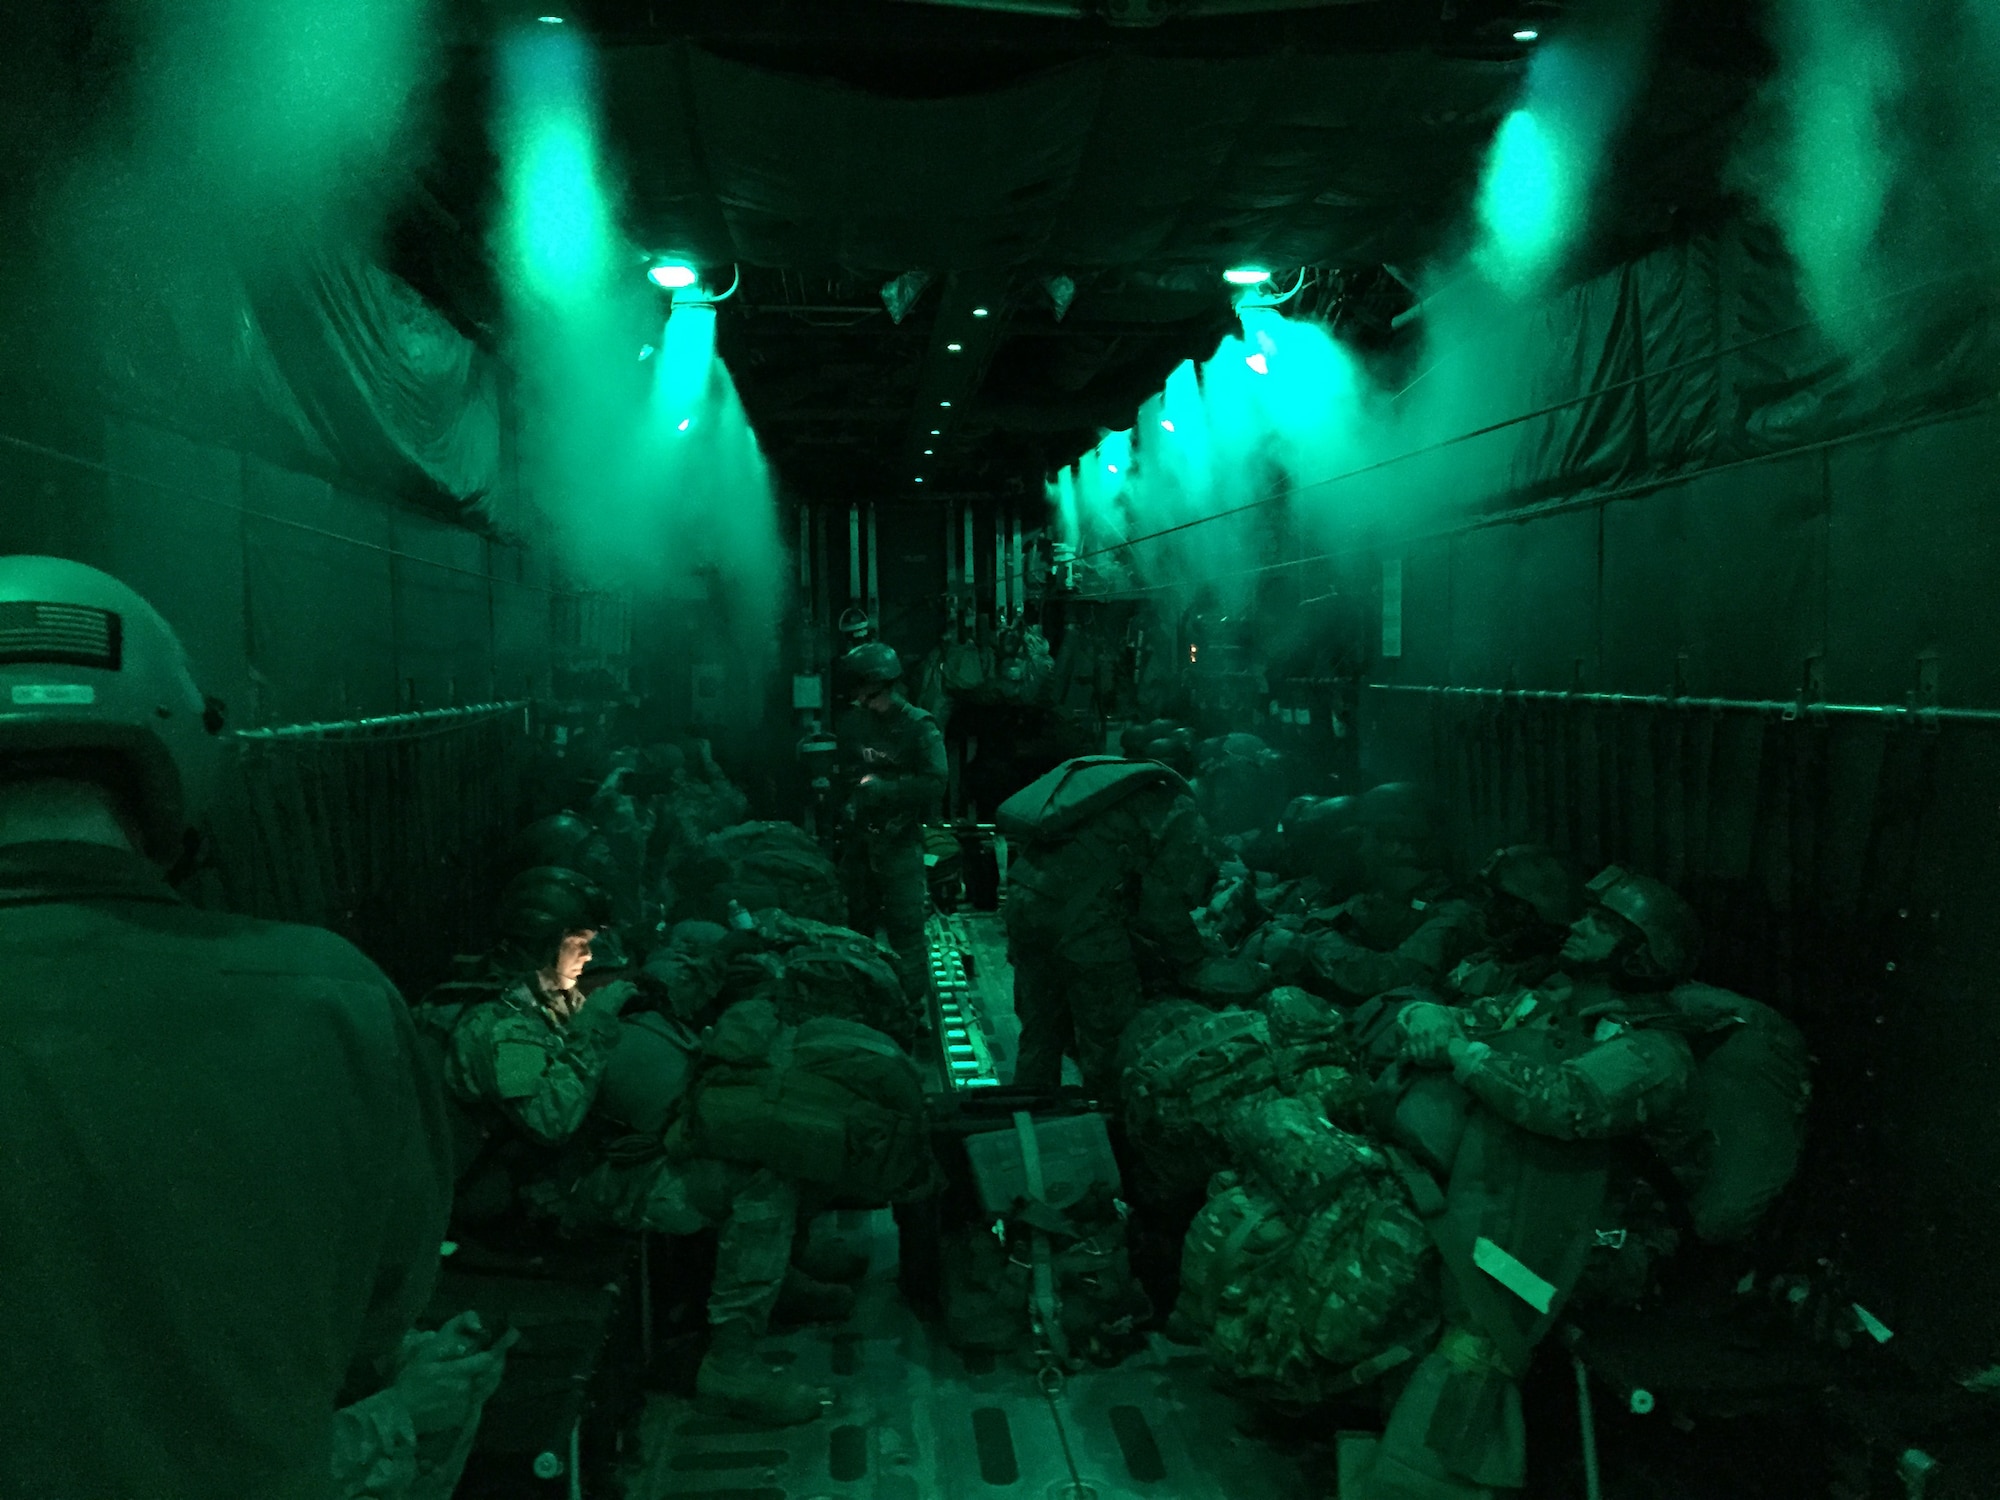 U.S. Army paratroopers standby while approaching their designated drop zone aboard a C-130H Hercules aircraft assigned to the 103rd Airlift Wing Oct. 8, 2014, in the skies above Hunter Army Airfield, Ga. This is the second opportunity for the Flying Yankees to successfully aid in the preparation and execution of paratrooper air drops during joint Army air transportation training missions with their newly-assigned aircraft. (Photo courtesy of Tech. Sgt. Tufic Paone)